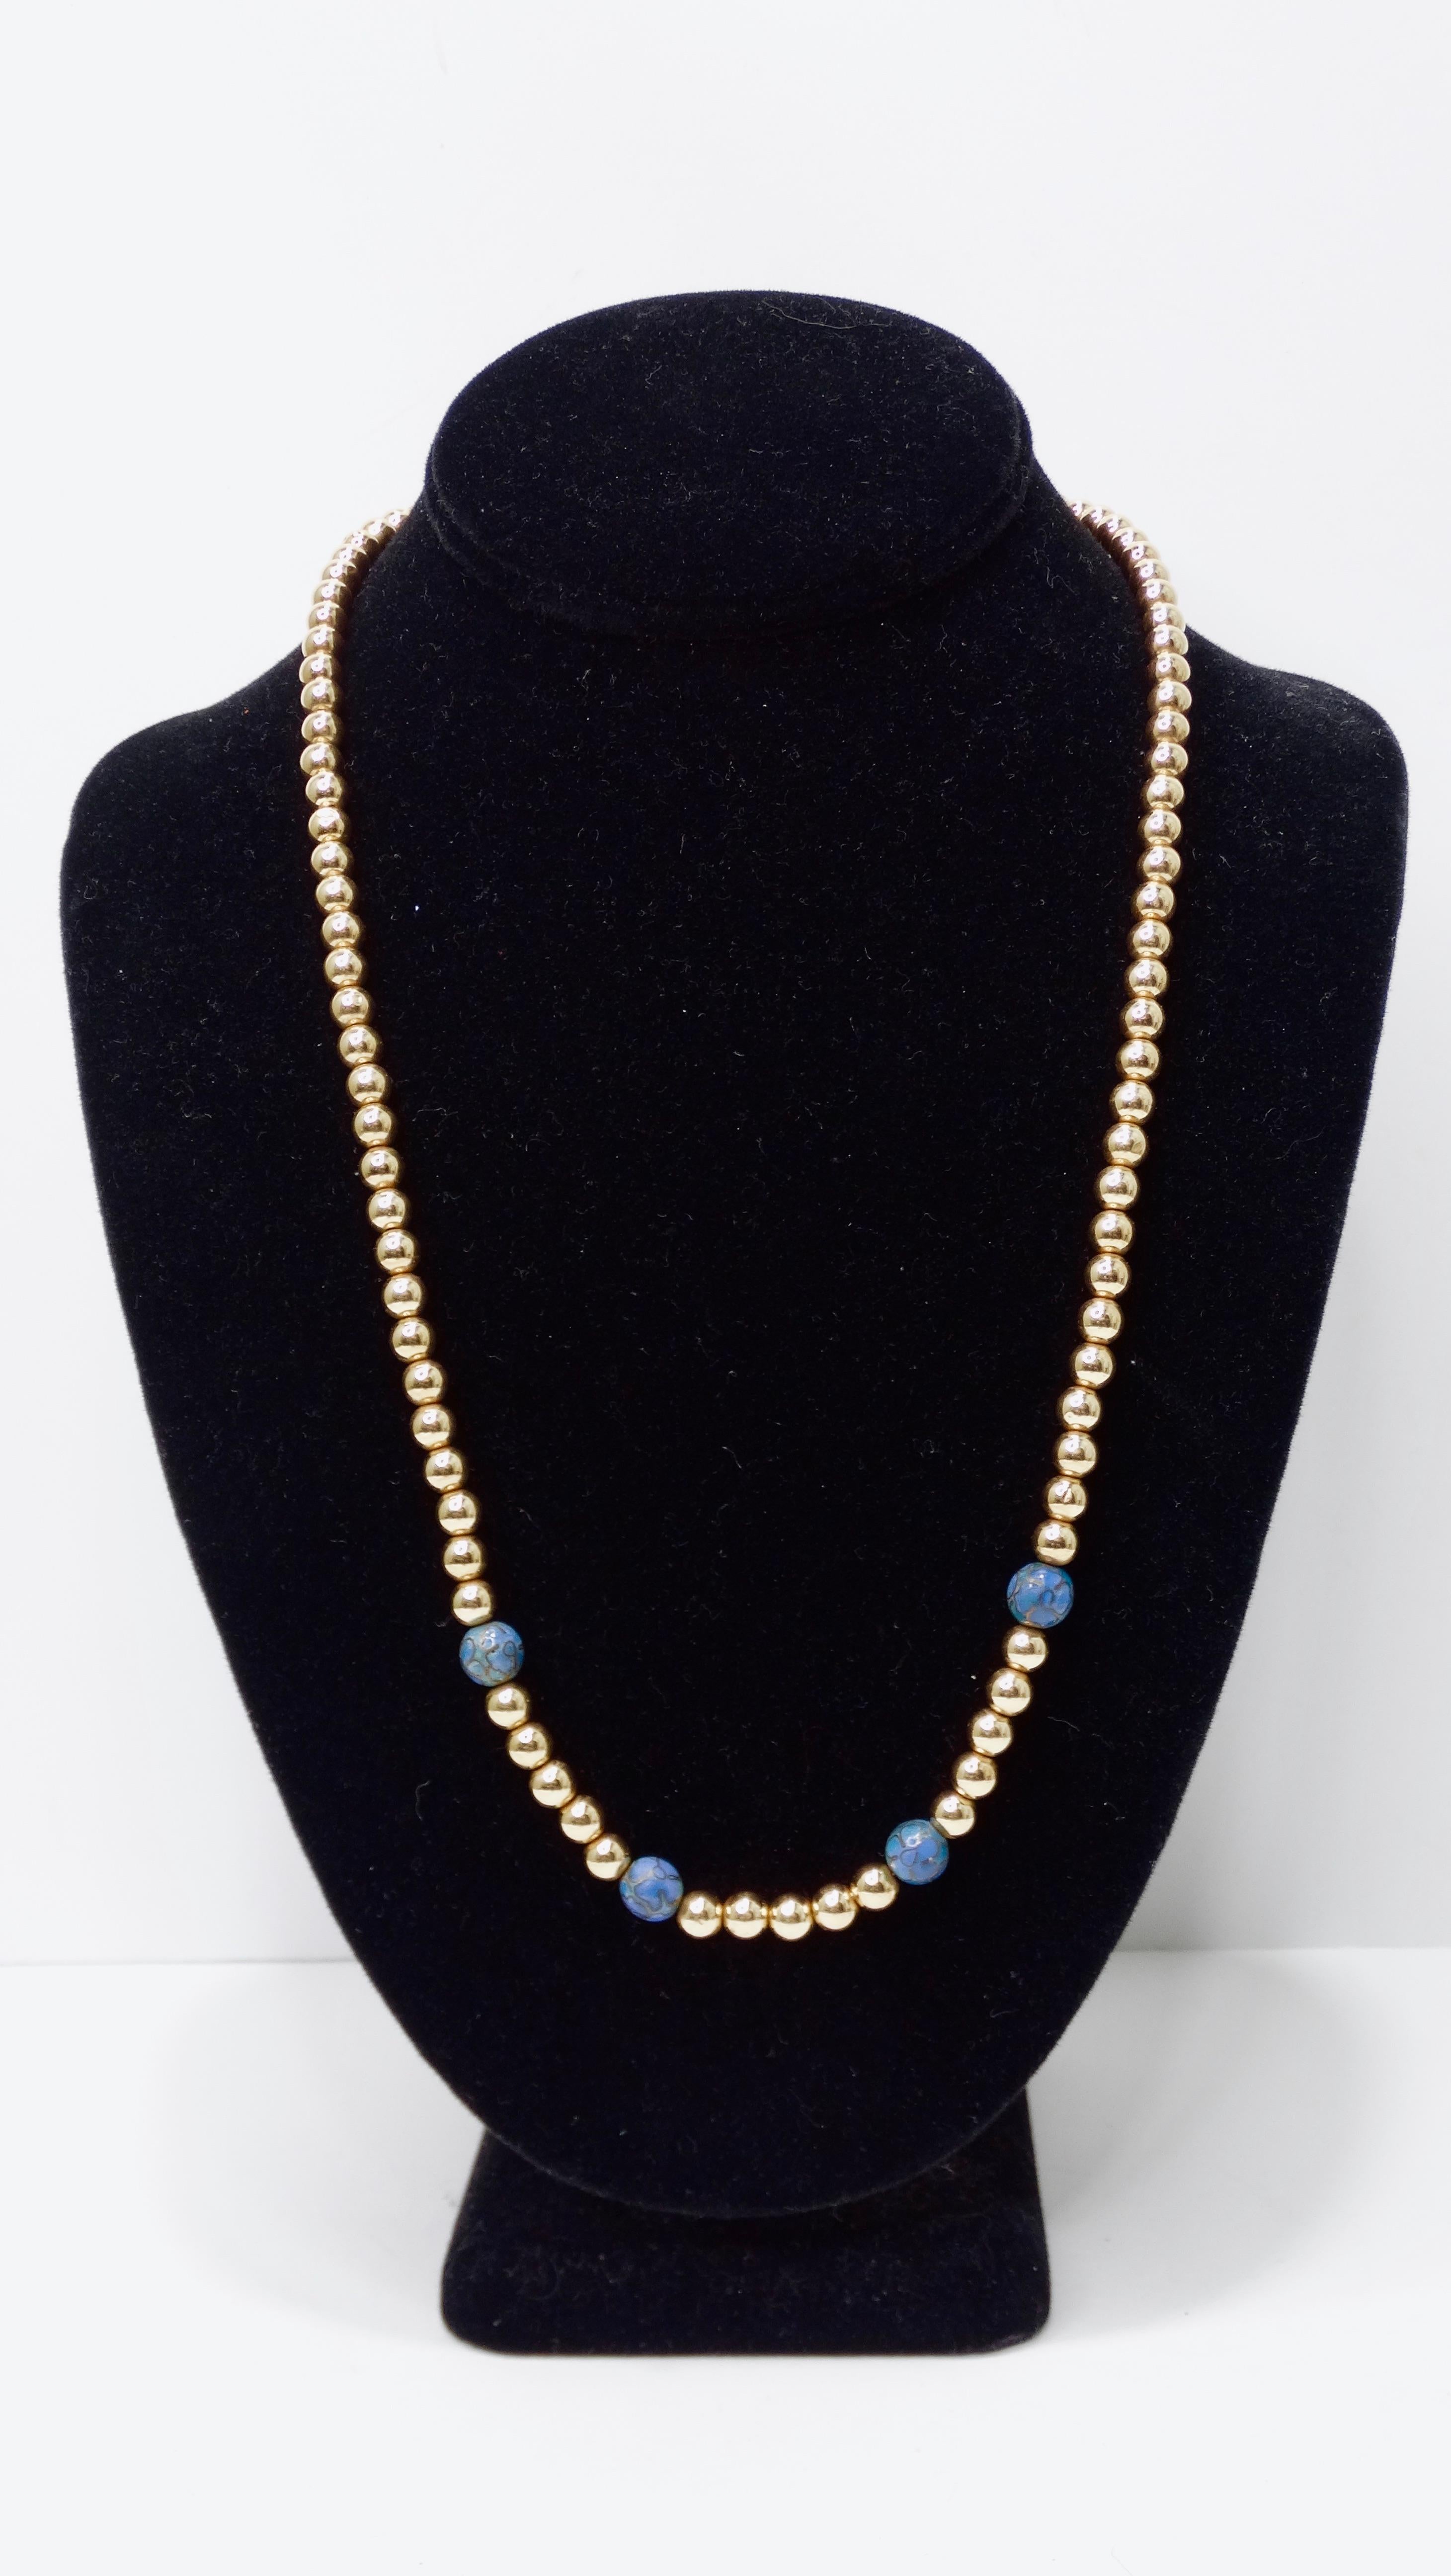 This necklace will be your next go-to piece of jewelry in your collection! You will be reaching for this necklace everyday whether it be getting ready for a date-night or a special event. This is really a super unique find! This necklace is a